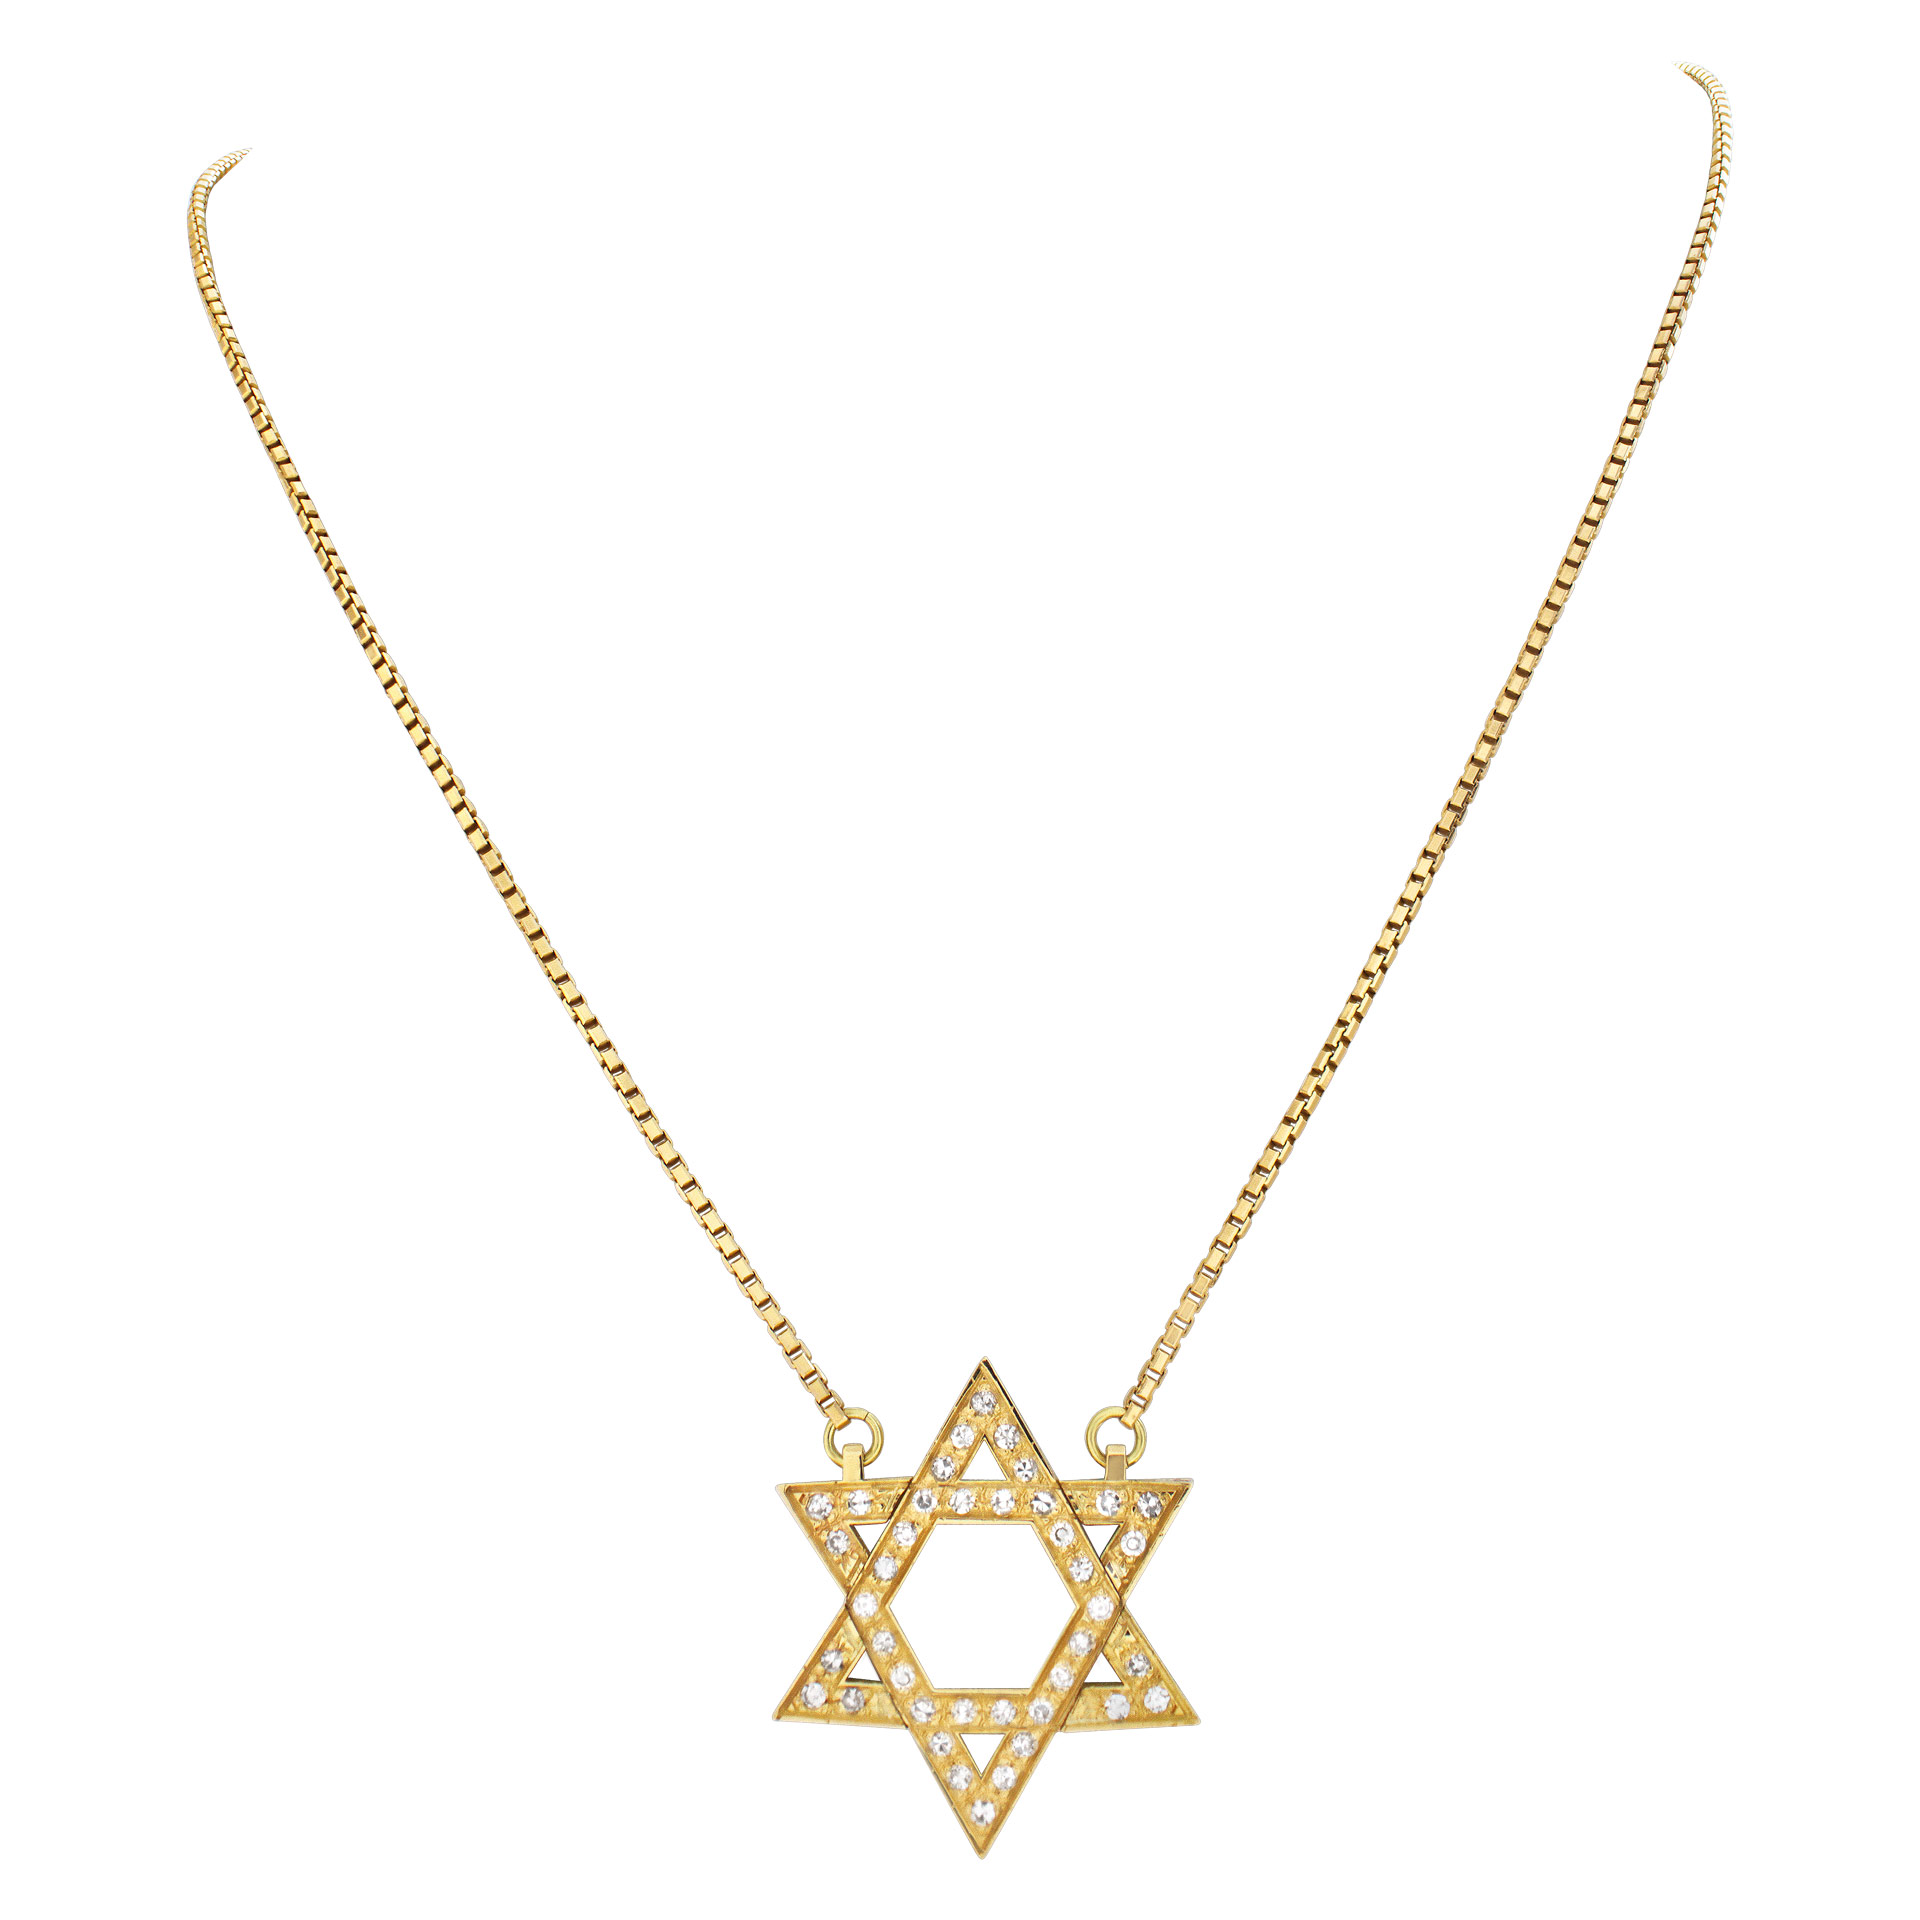 "Star of David" pendant with approximately 0.75 carat pave diamonds set in 18k yellow gold